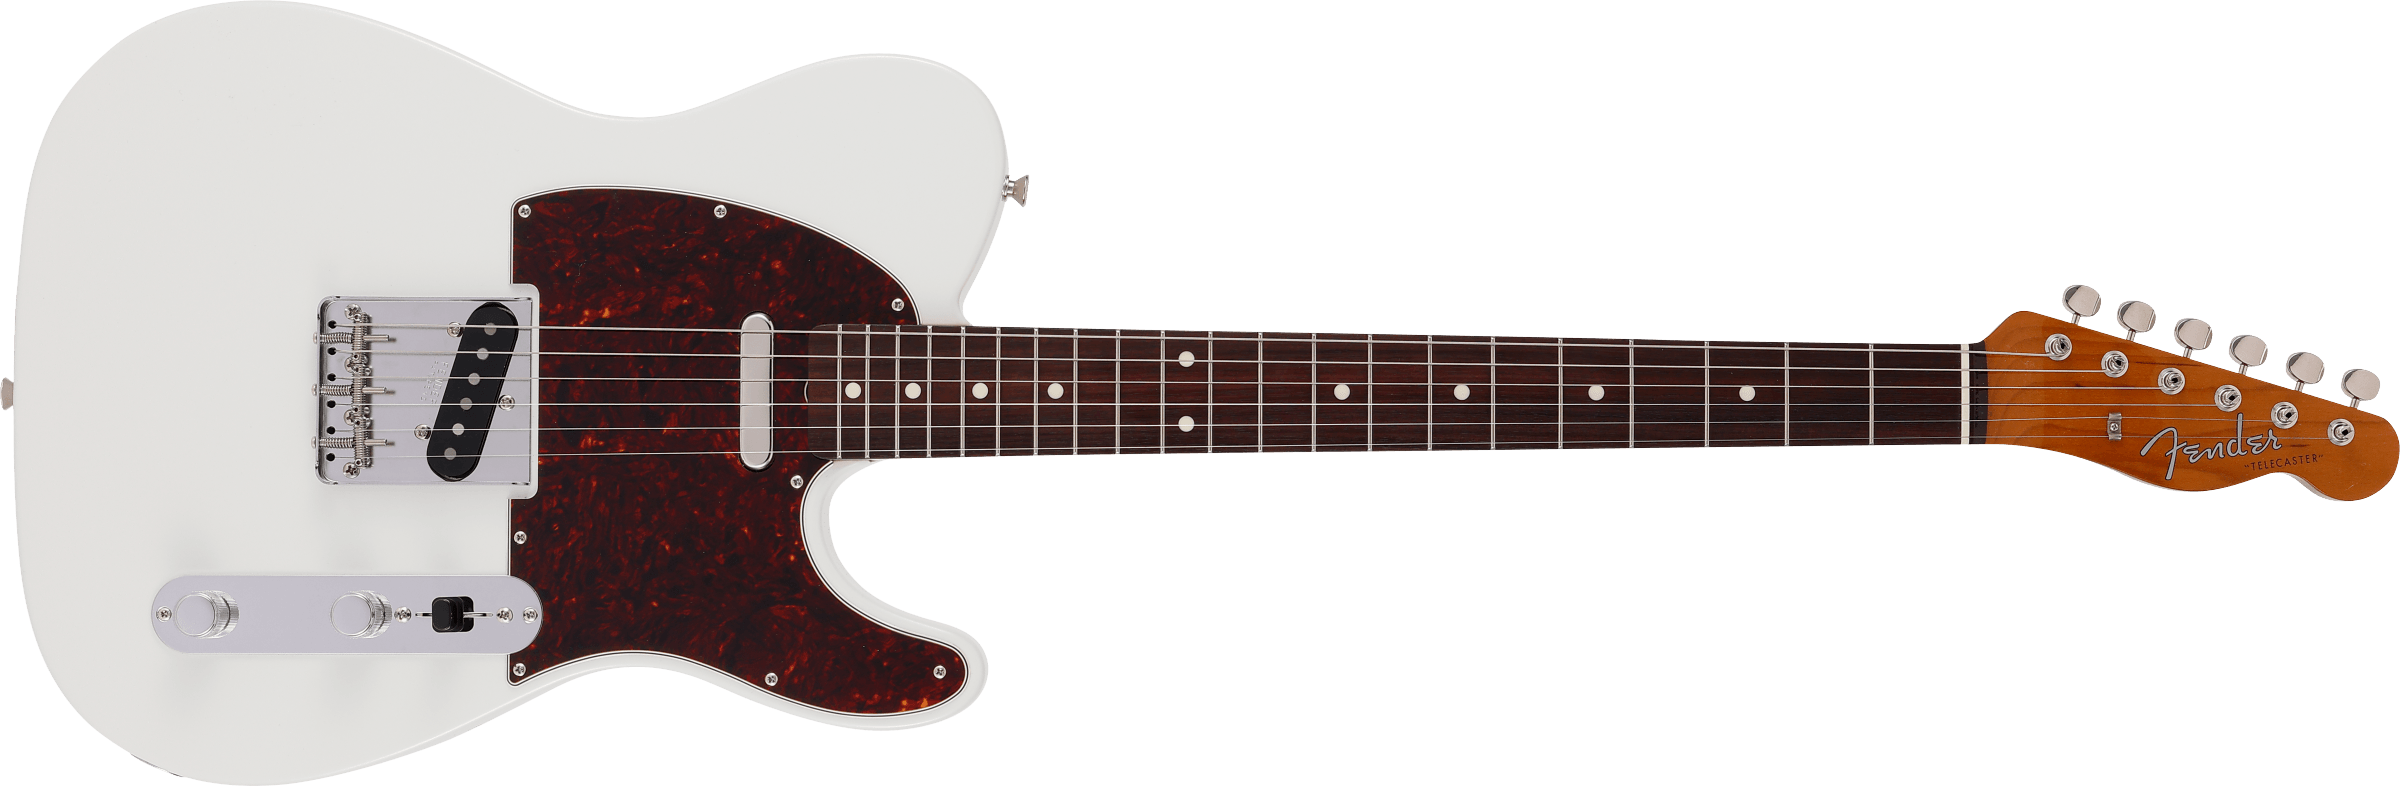 Fender 2021 Collection Made in Japan Traditional 17製品が登場 